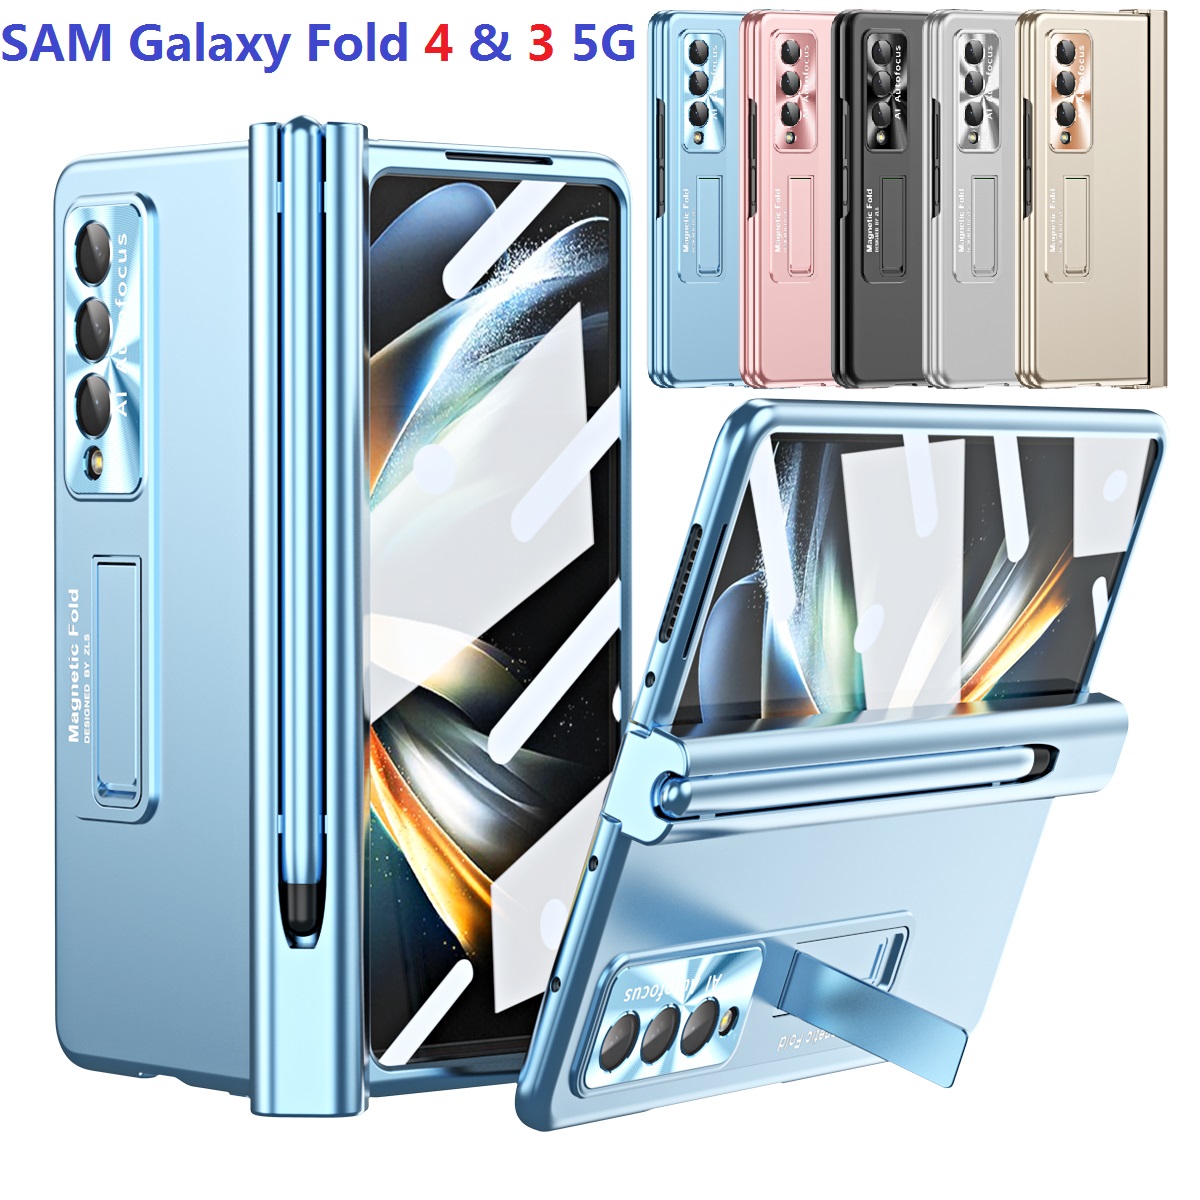 

Hinge Magnetic Cases For Samsung Galaxy Z Fold 4 Fold 3 5G Case Pen Holder Plating Stand Protective Film Cover, Black